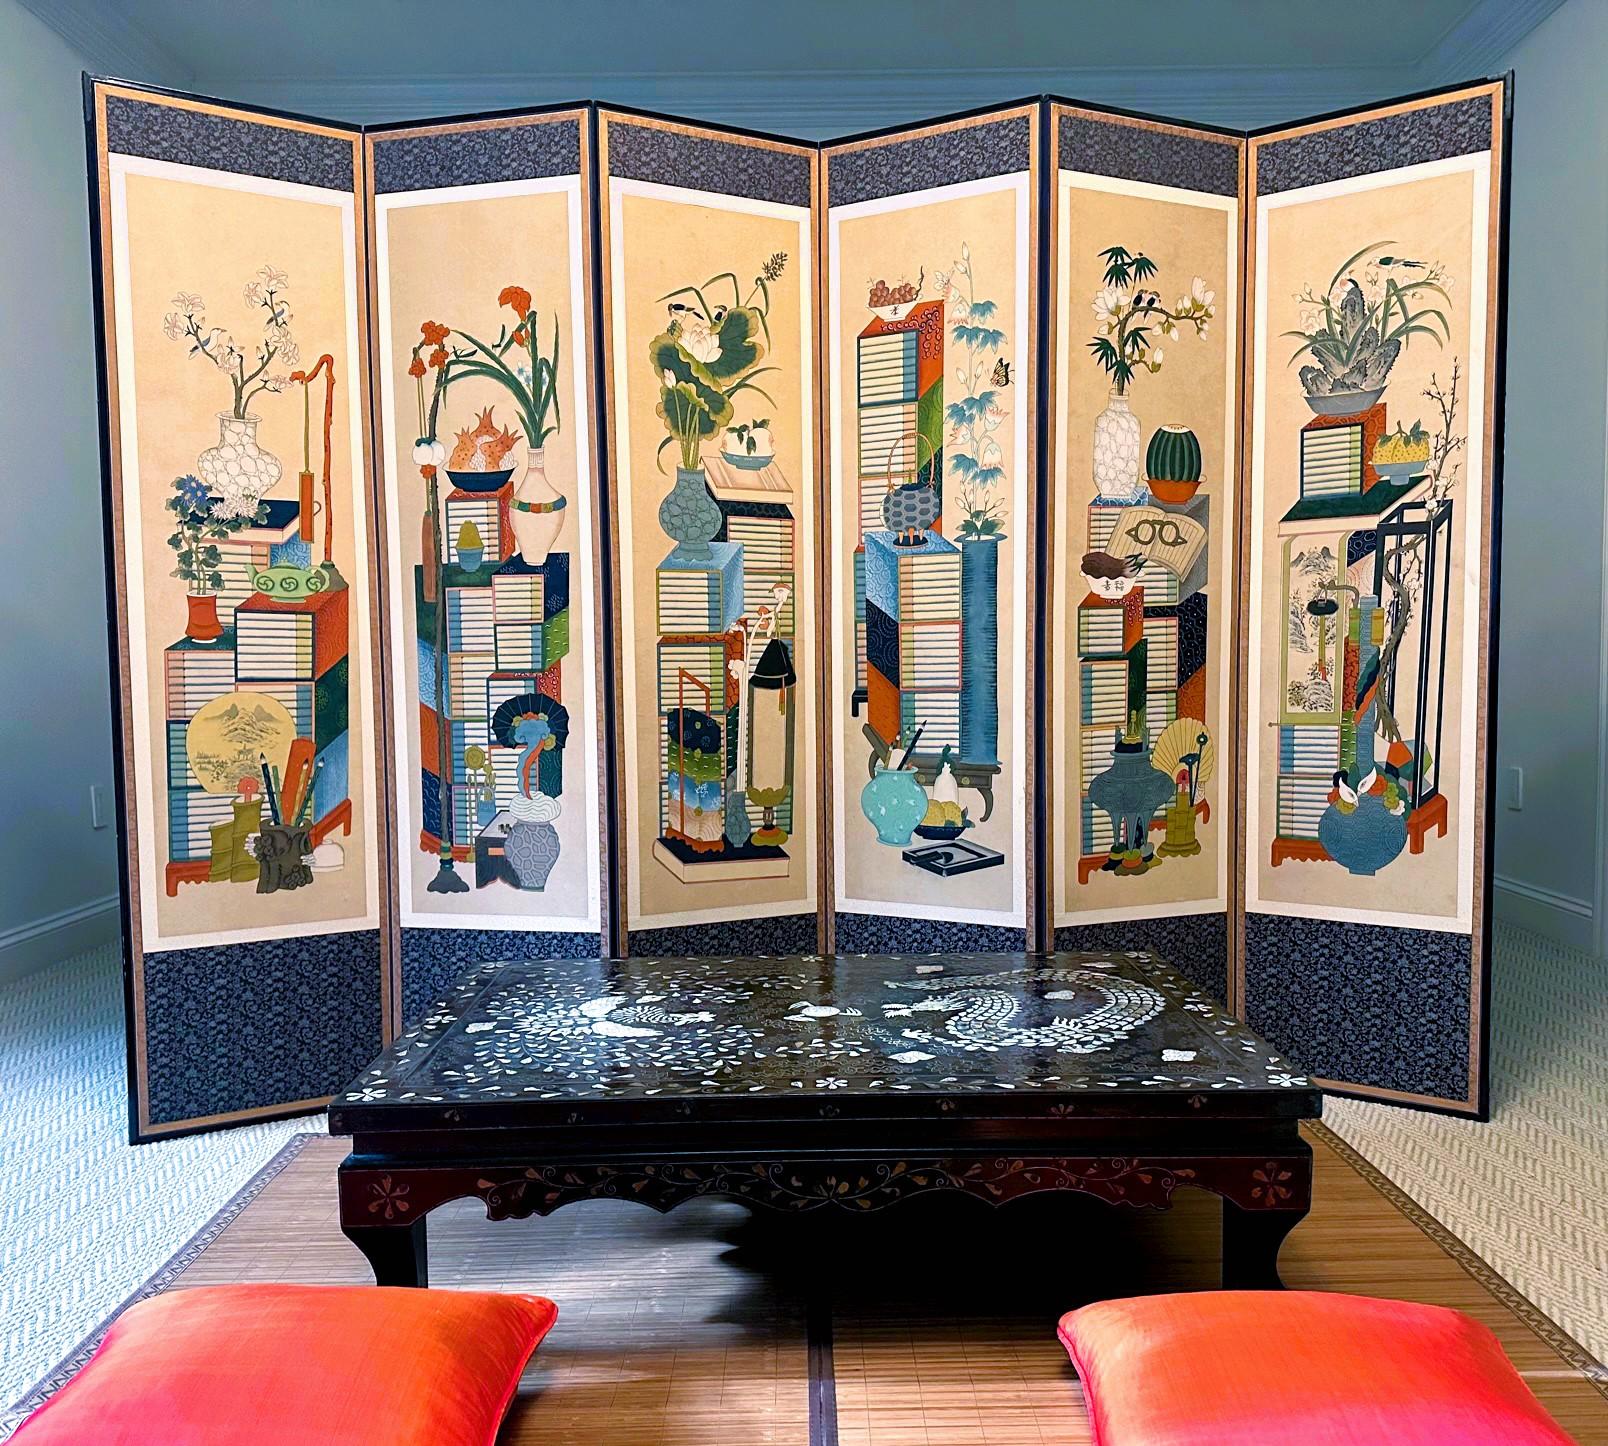 A six-panel painted folding floor screen from Korea circa early 20th century. This type of screen is called Chaekgeori (books and things) which is quite unique to Korea. It became popular at the end of 18th century favored and encouraged by King